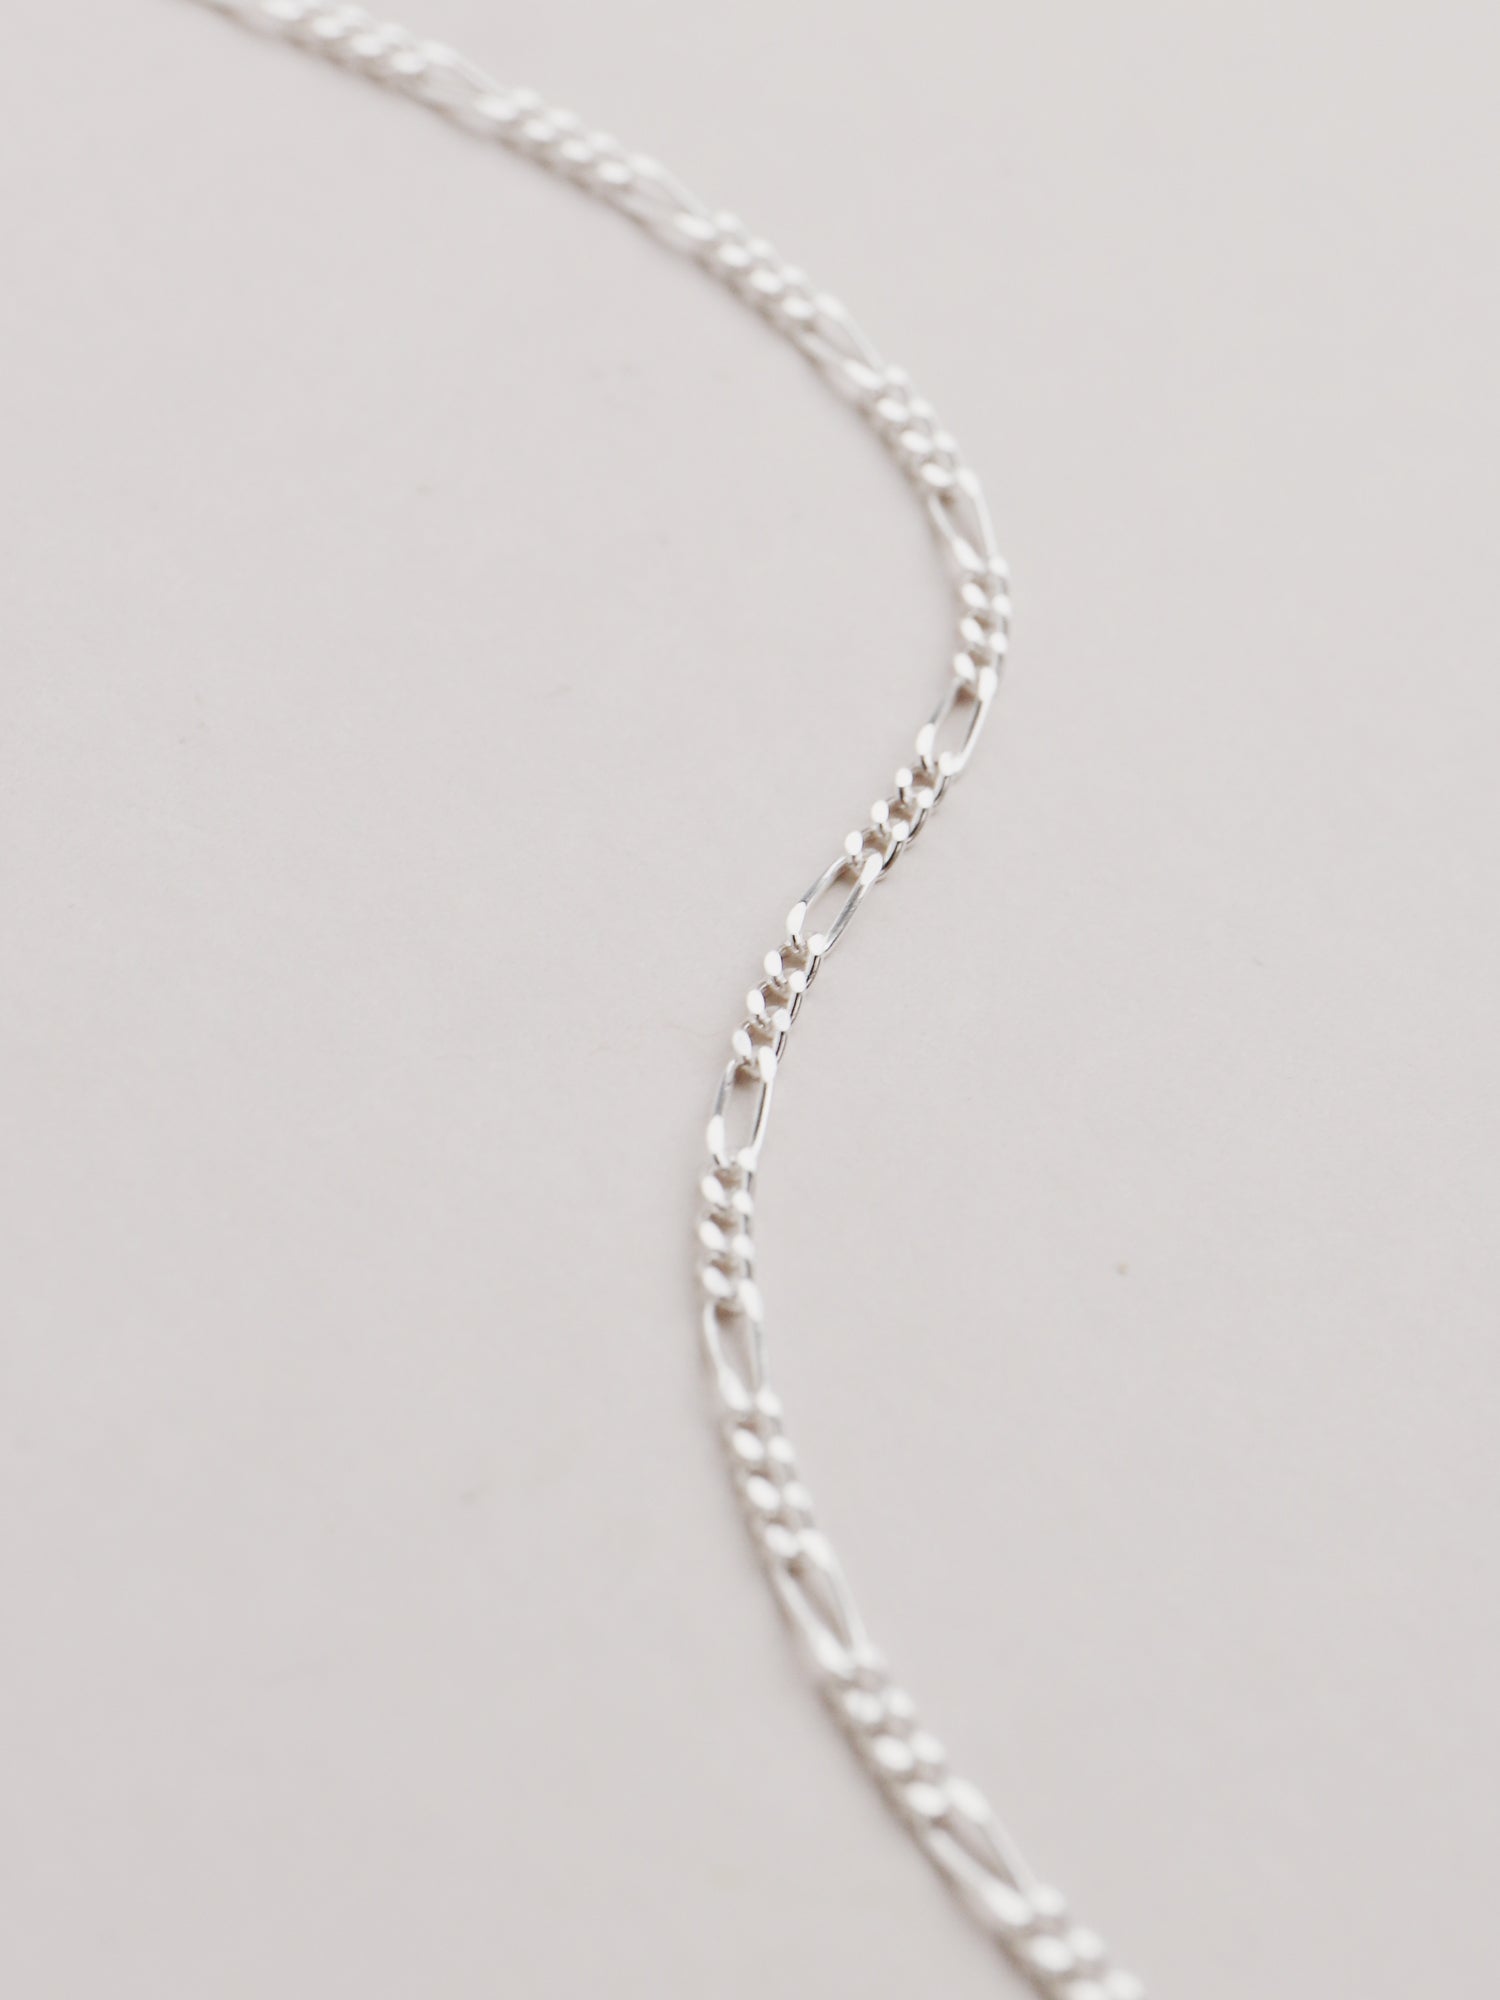 Sterling Silver Figaro Chain